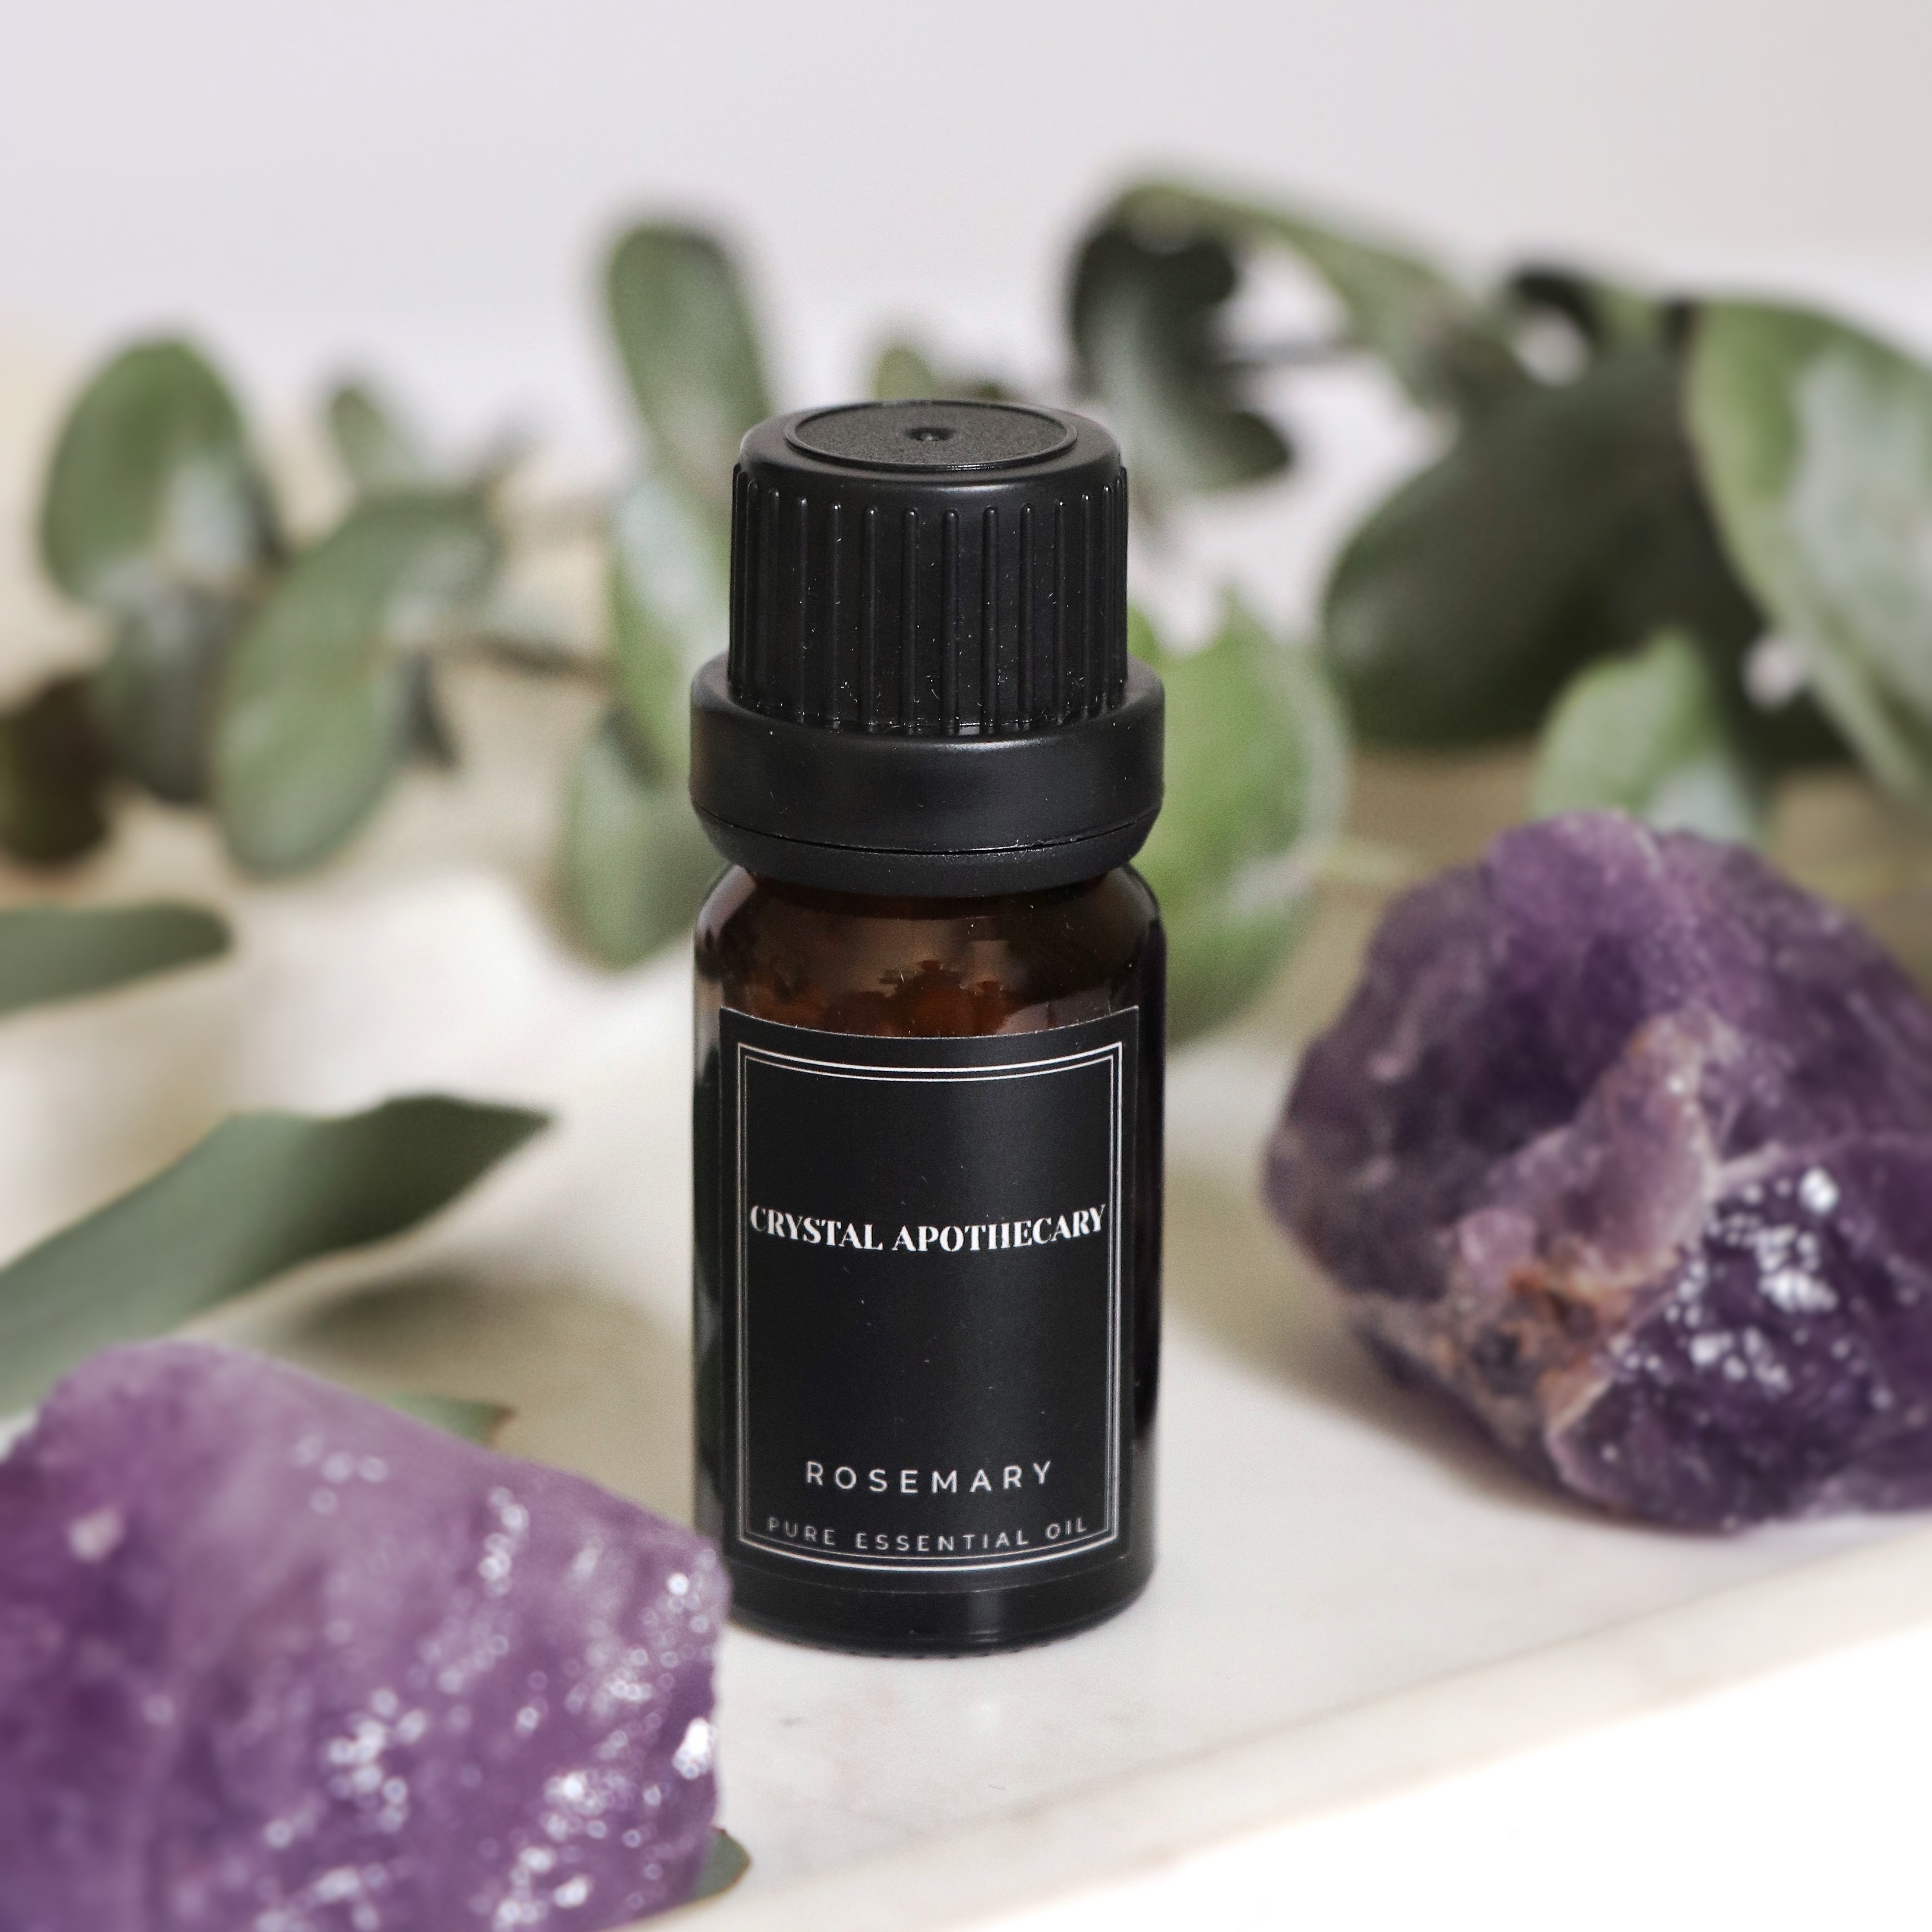 Rosemary Pure Essential Oil with Amethyst